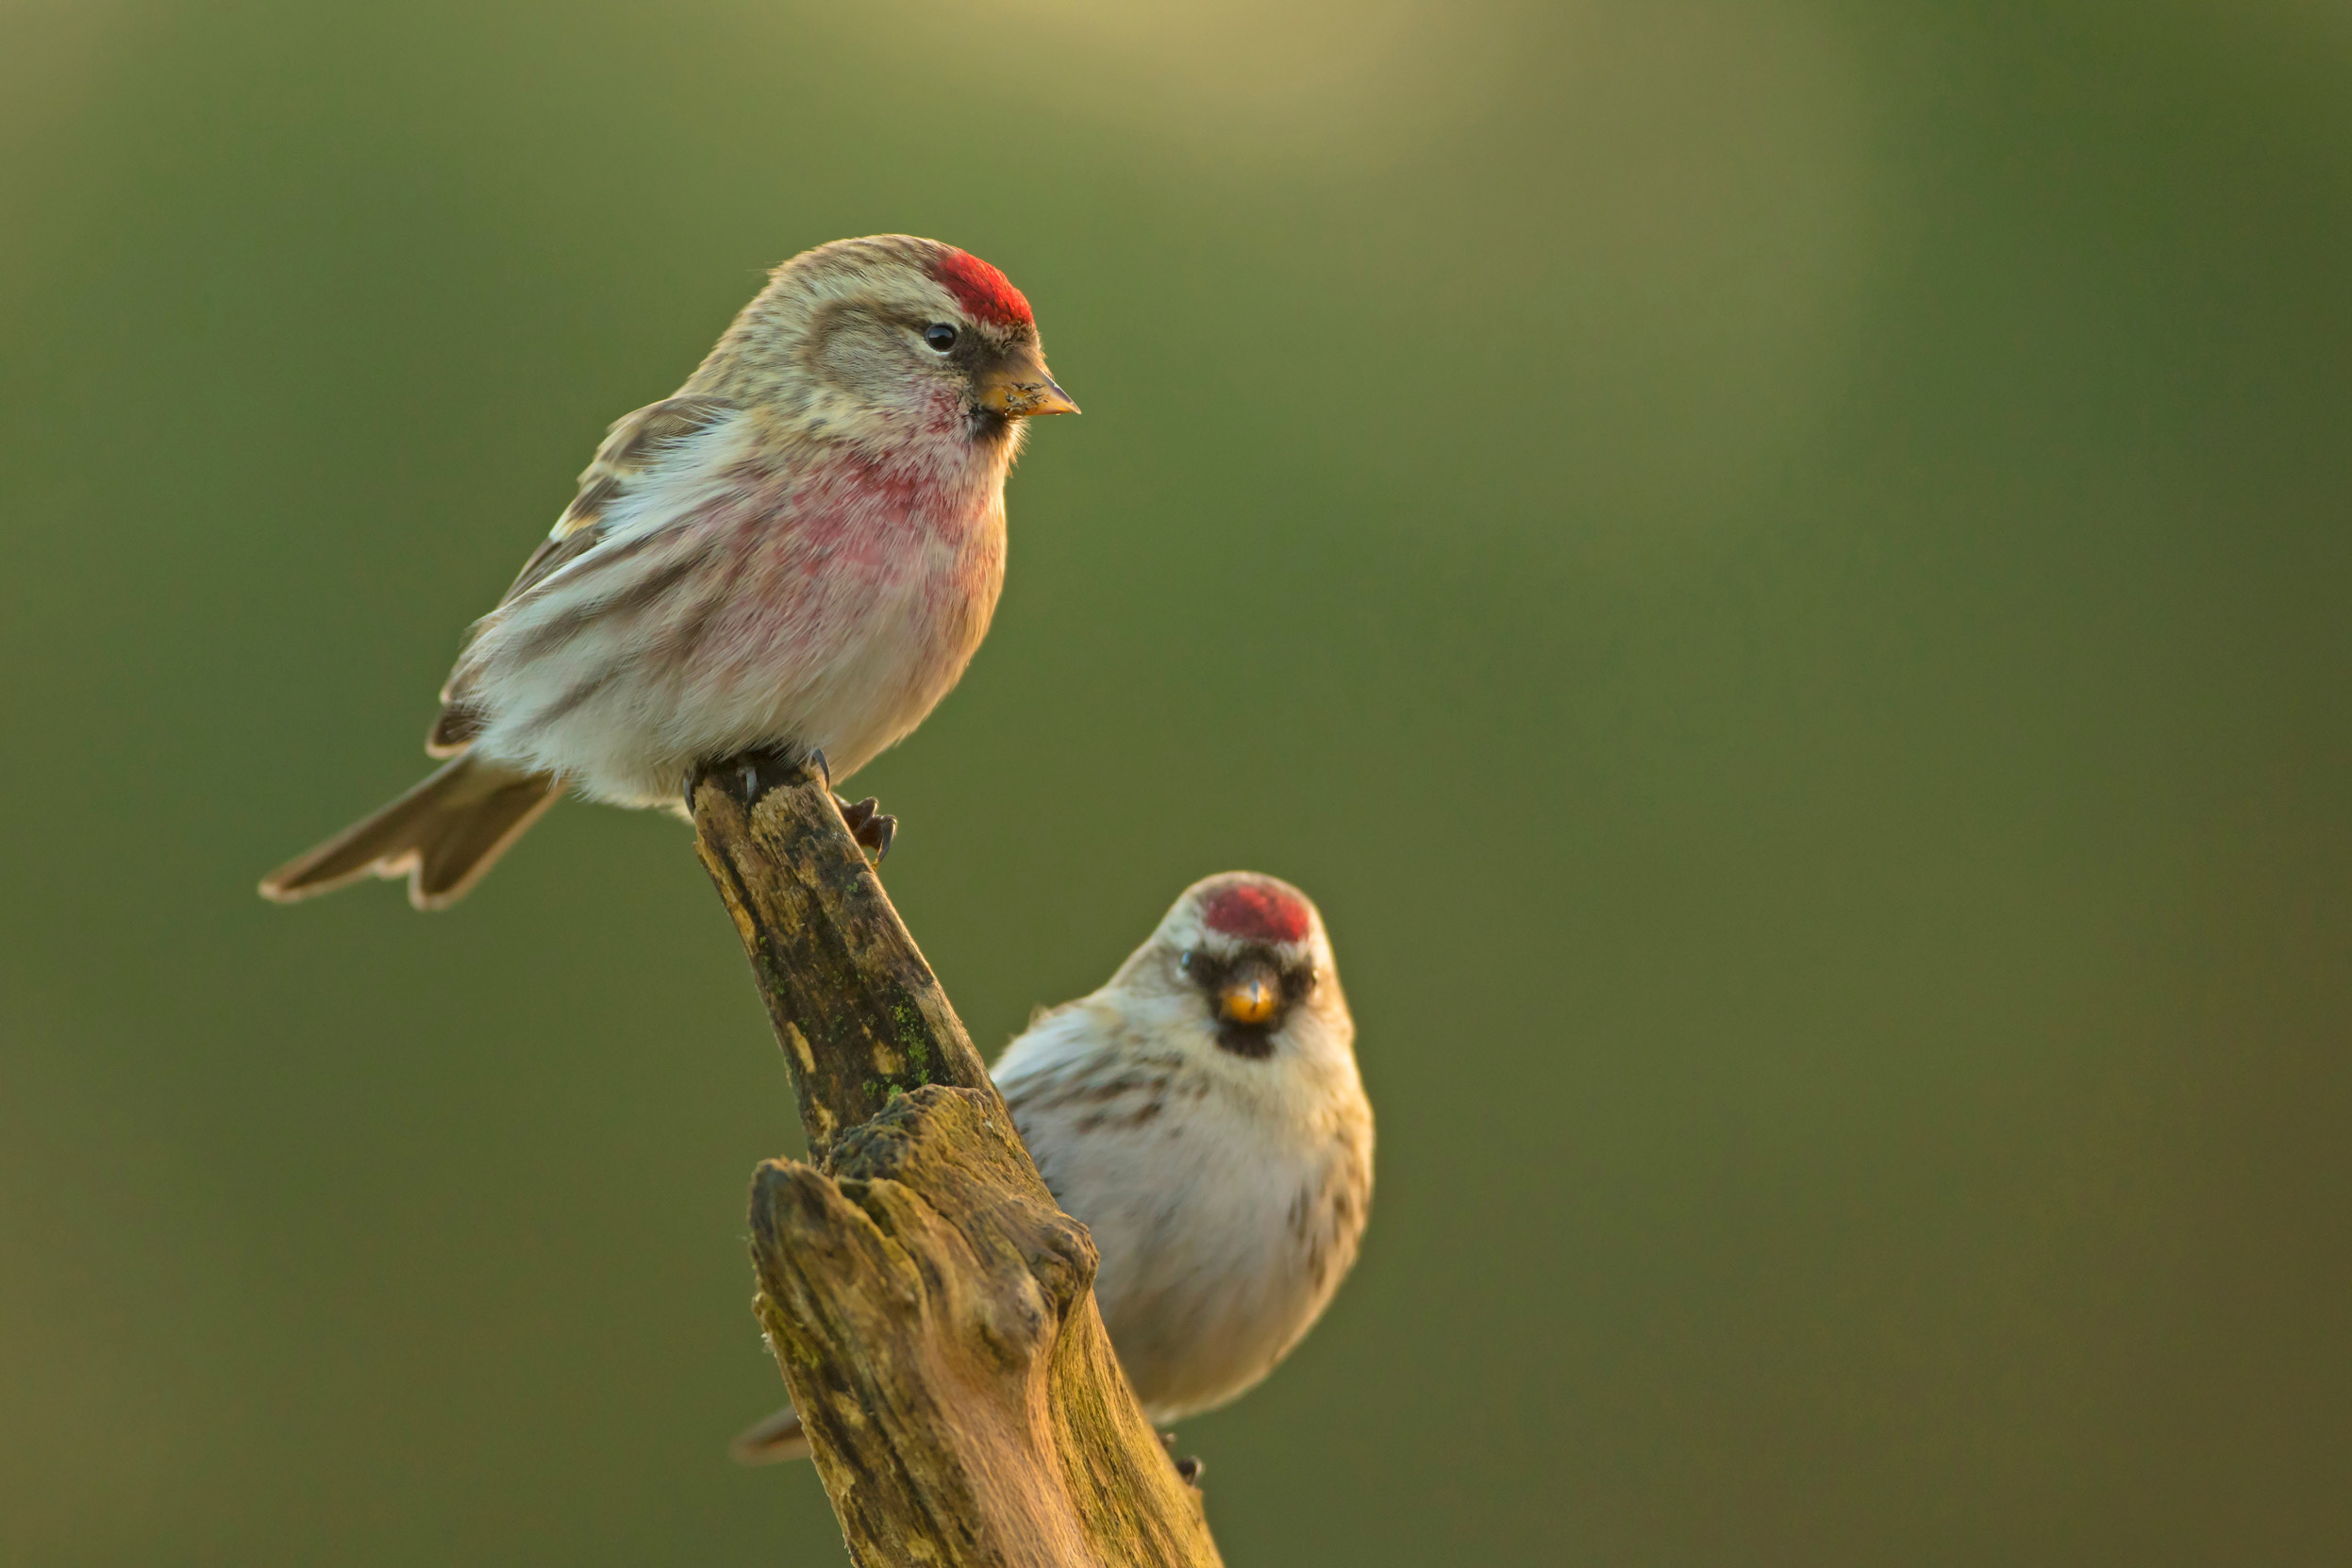 Two Redpolls sitting together on a branch.